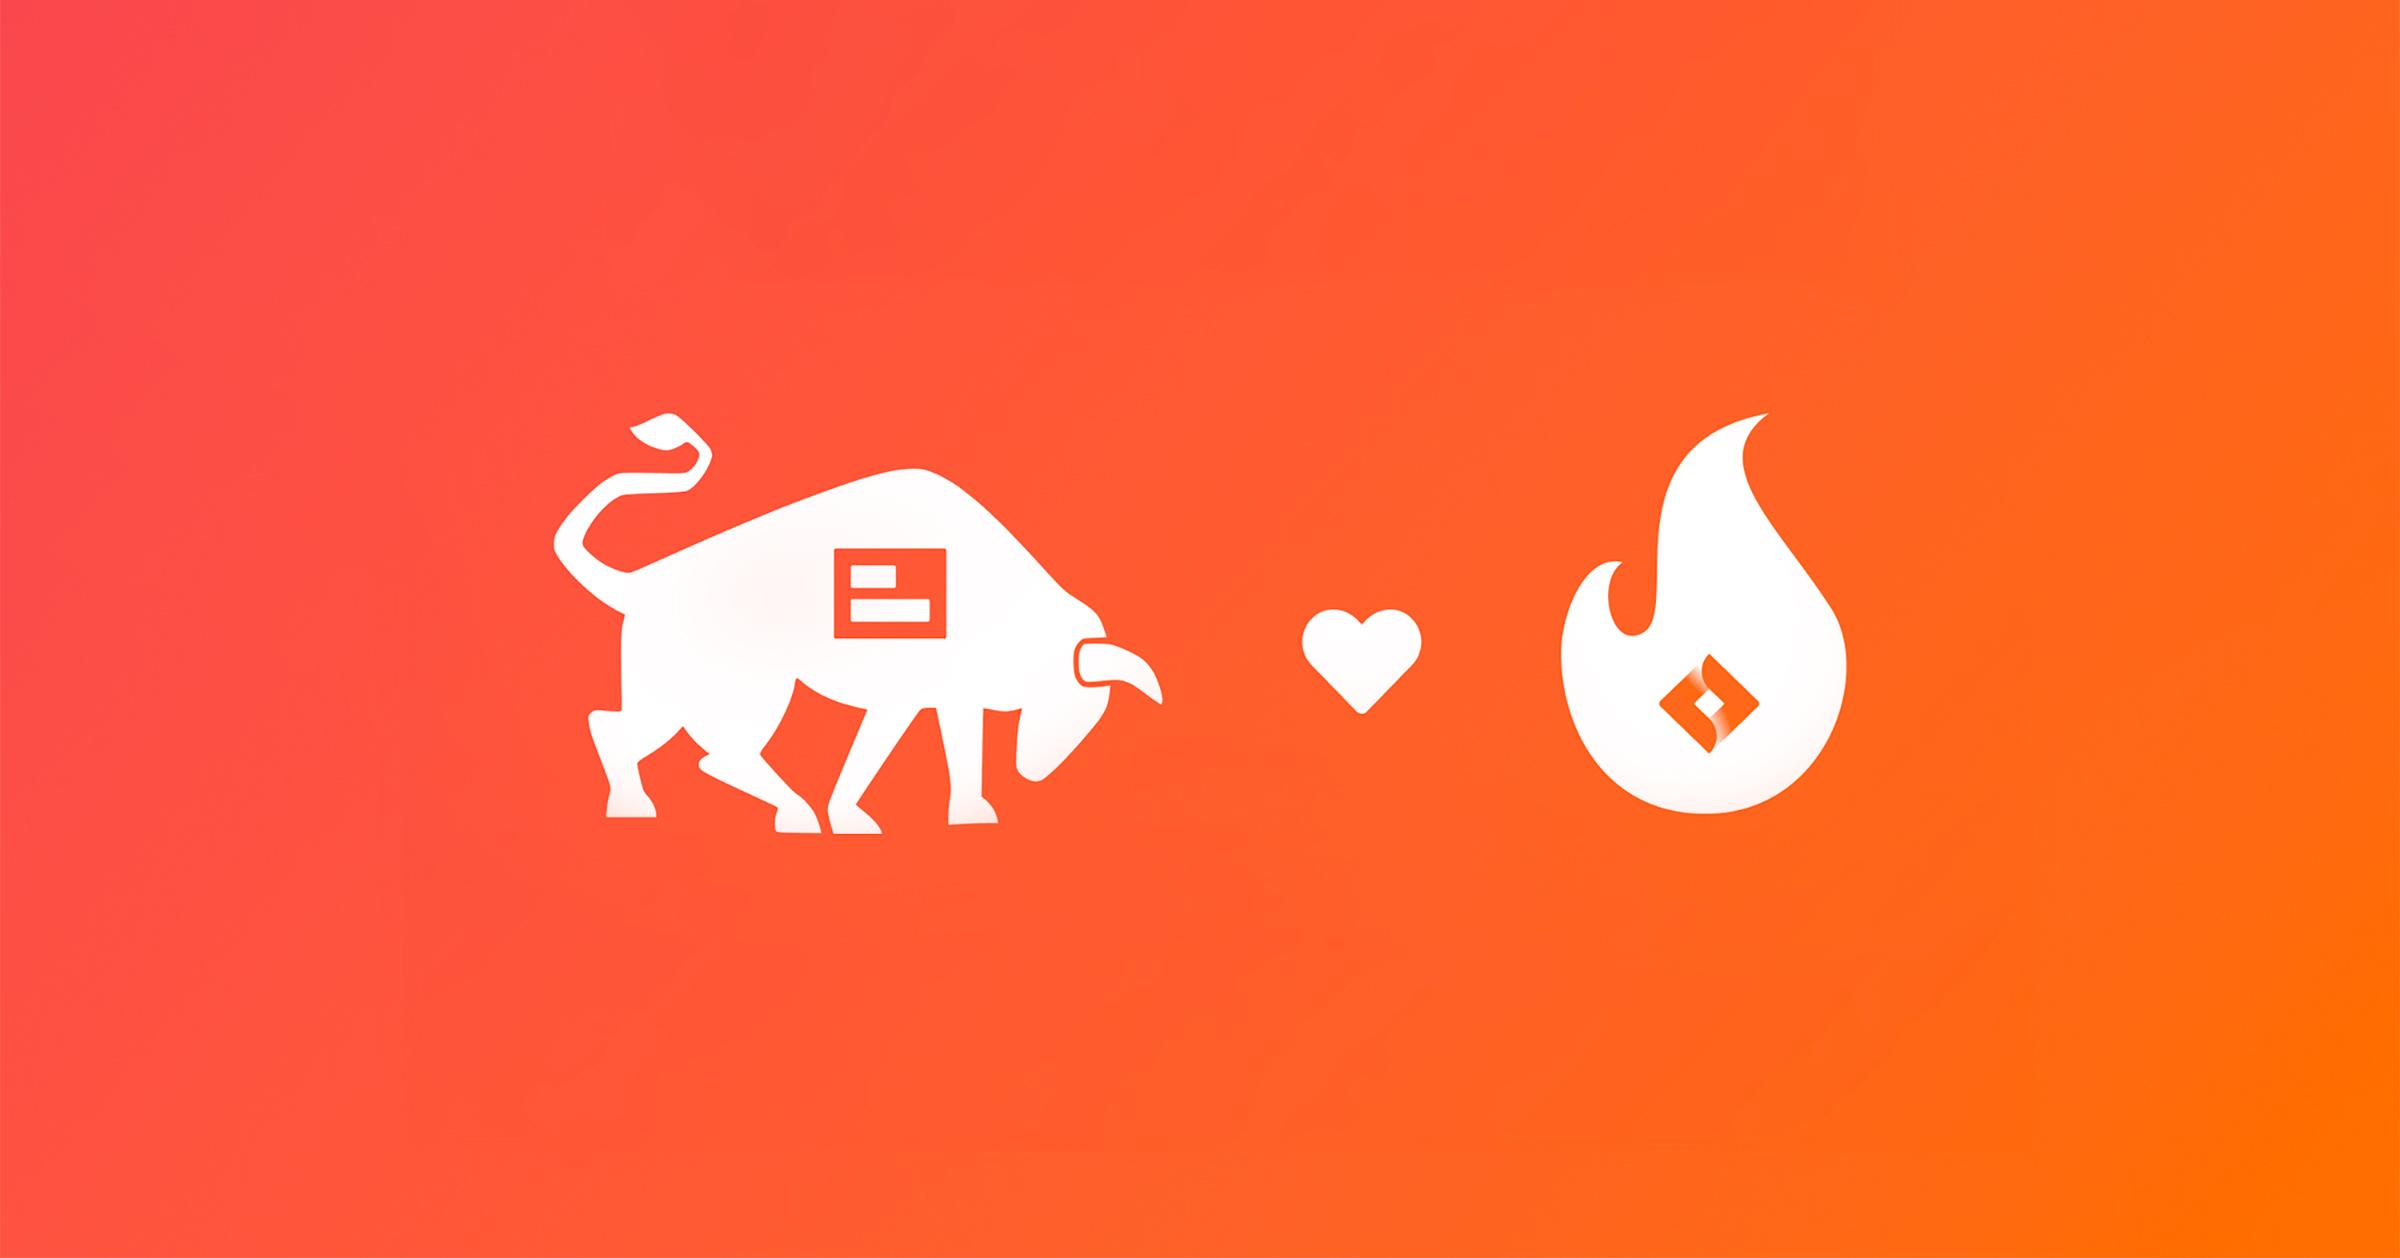 Astrological signs as associated with the Visor logo and Jira logo with a heart in between.